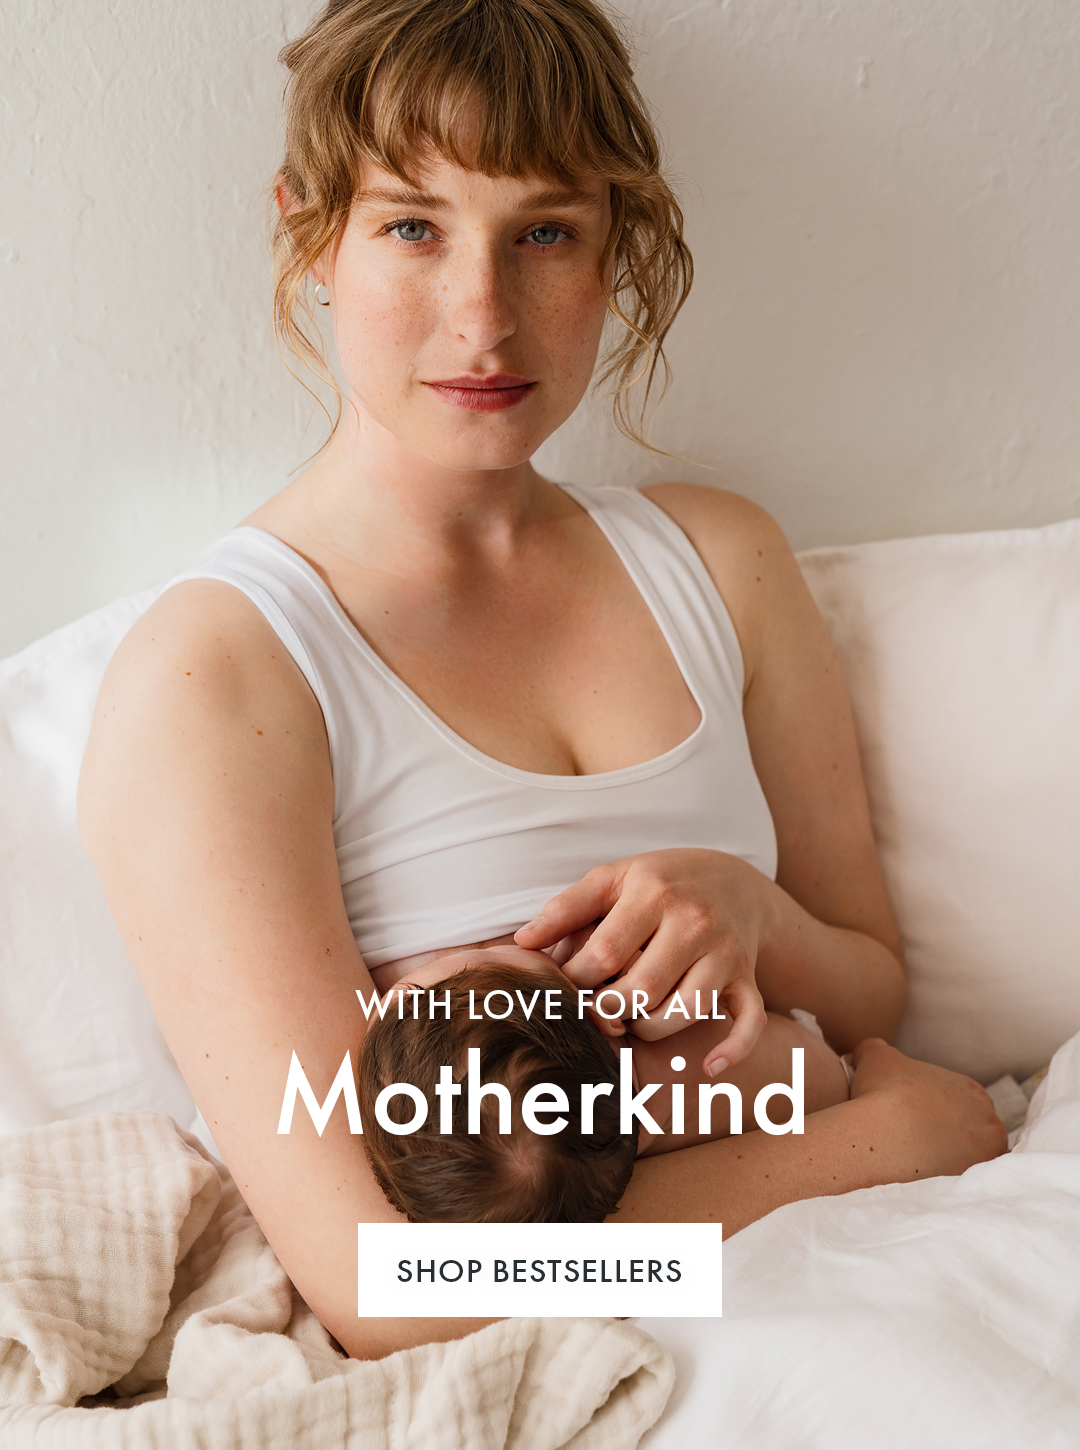 With love for all Motherkind